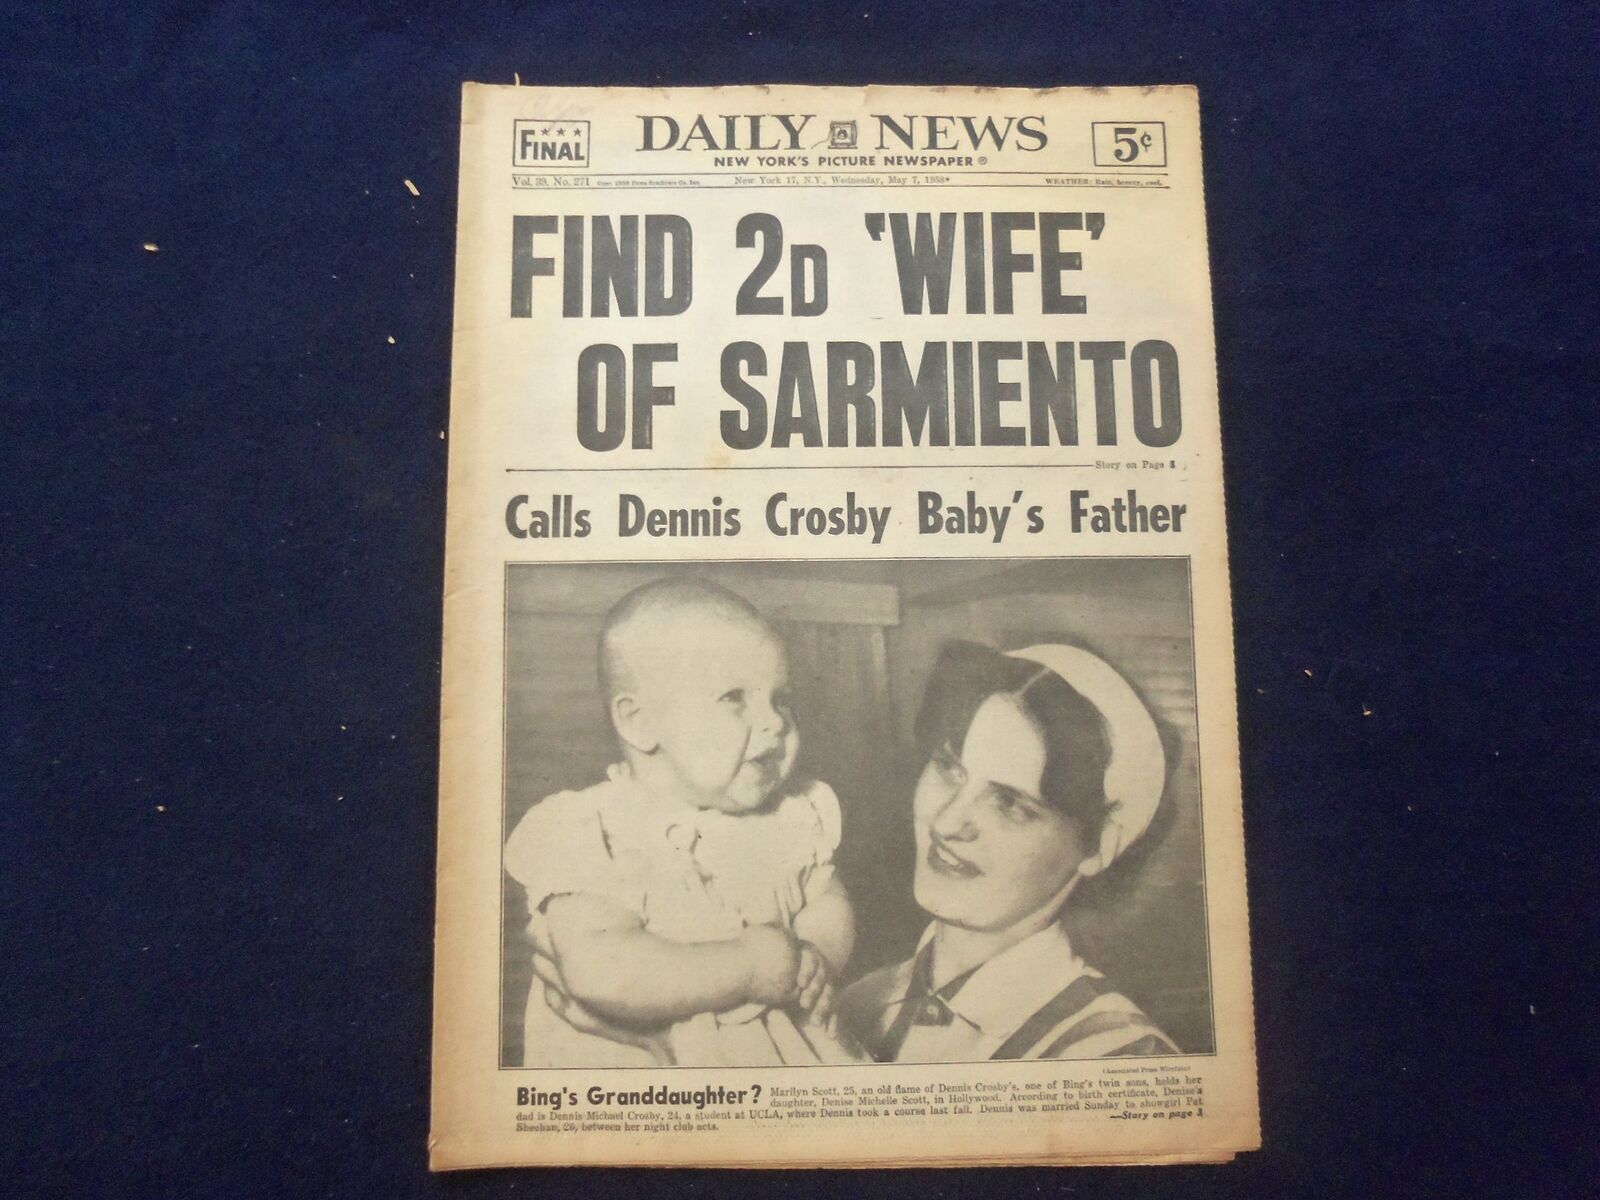 1958 MAY 7 NEW YORK DAILY NEWS NEWSPAPER - FIND 2ND WIFE OF SARMIENTO - NP 6752